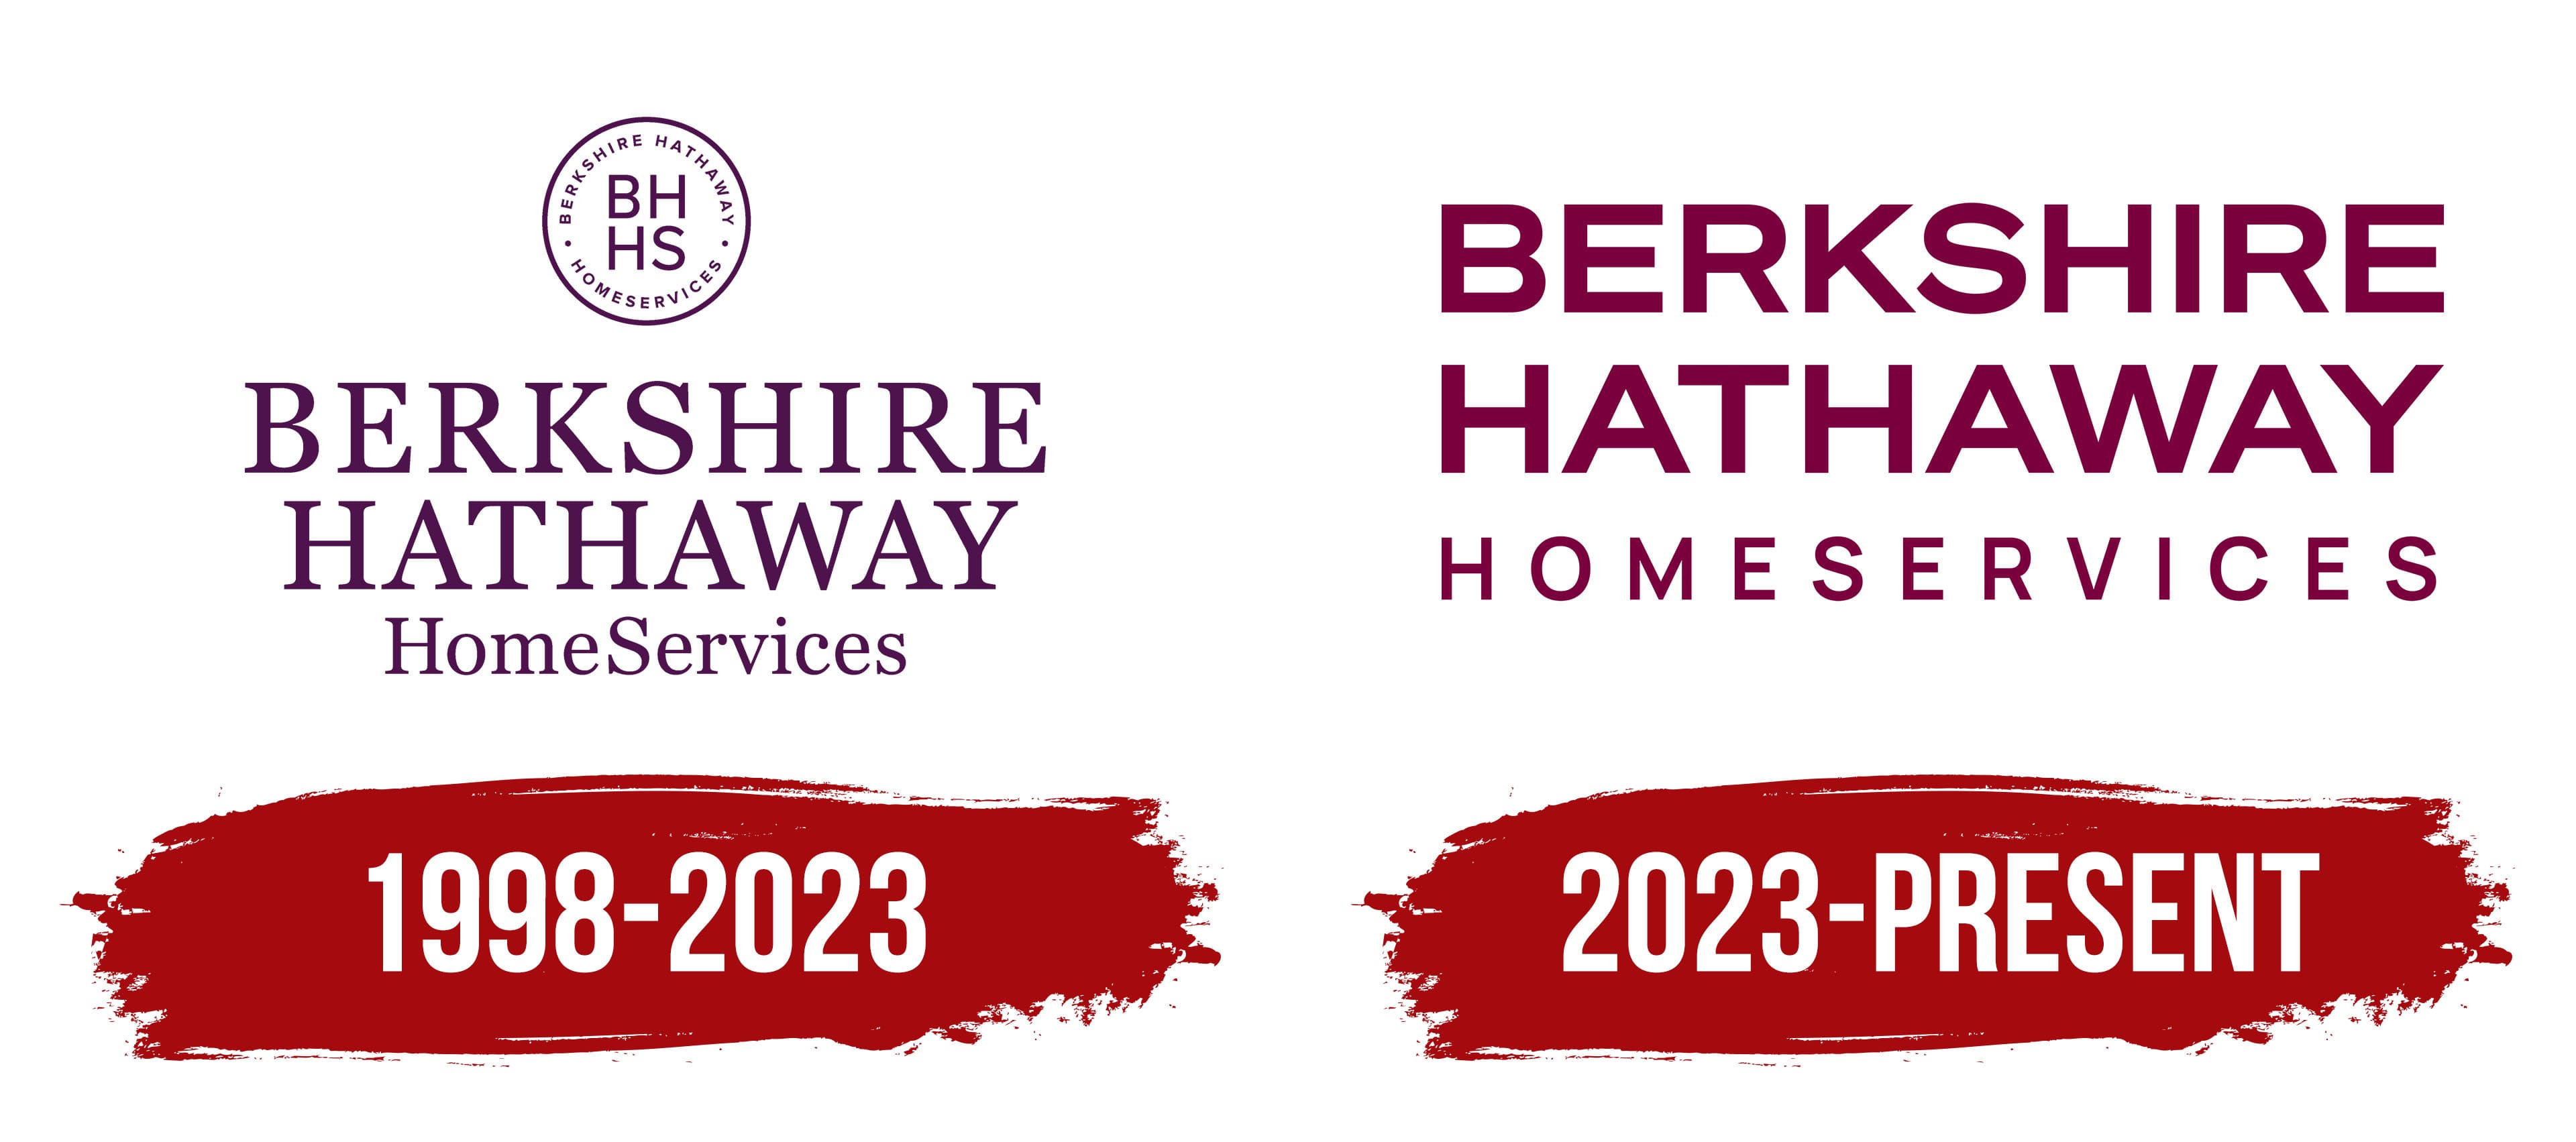 Berkshire Hathaway Taps Stamford Reinsurance Exec For New Role | Stamford,  CT Patch